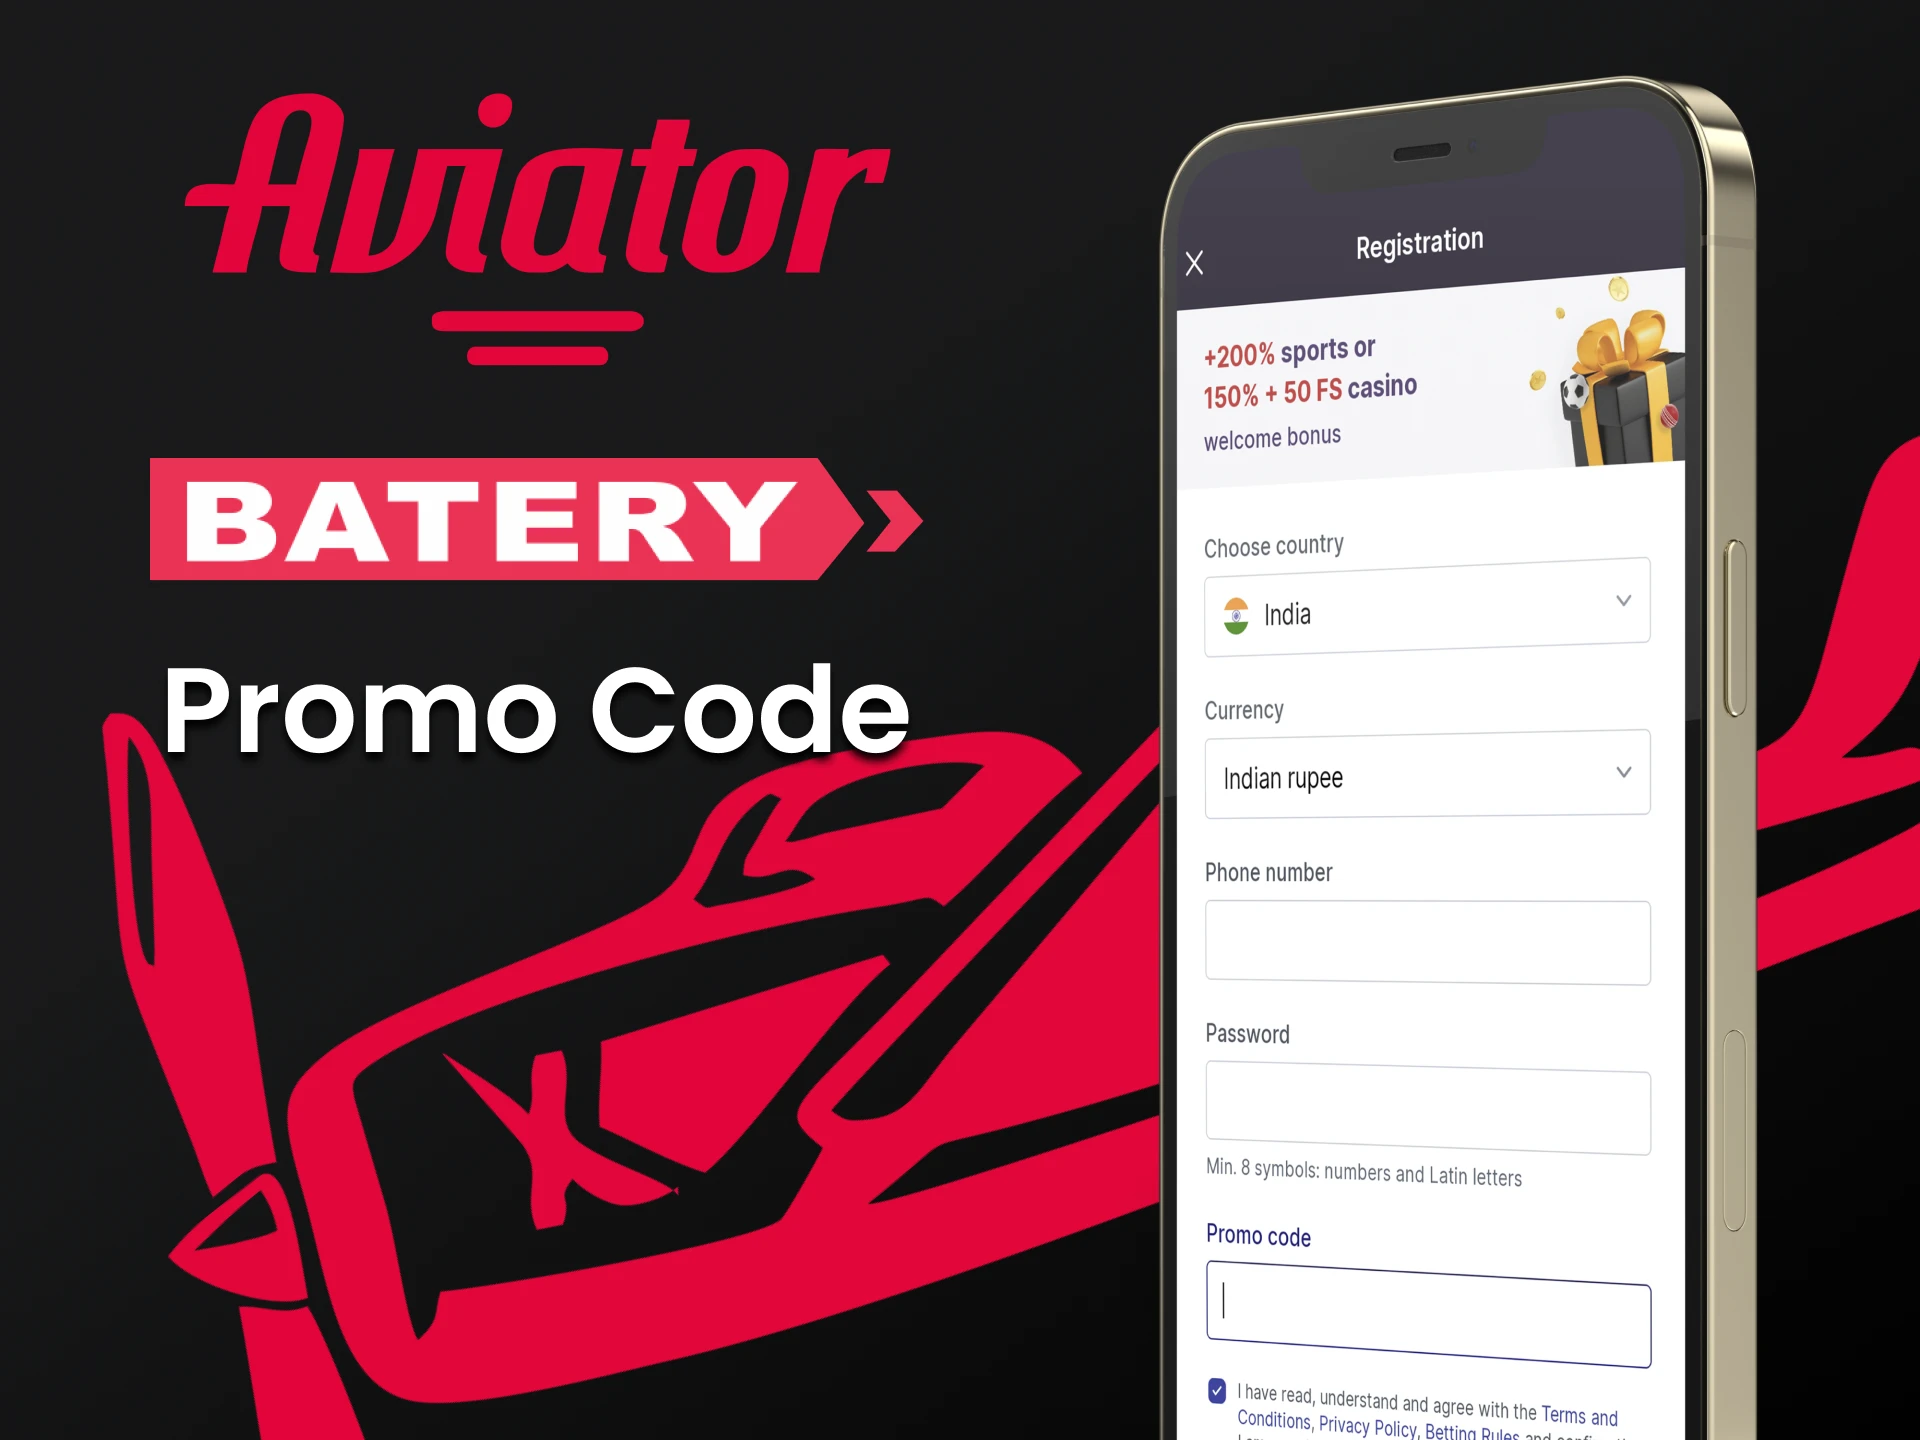 Use promo code to play Aviator on Batery.